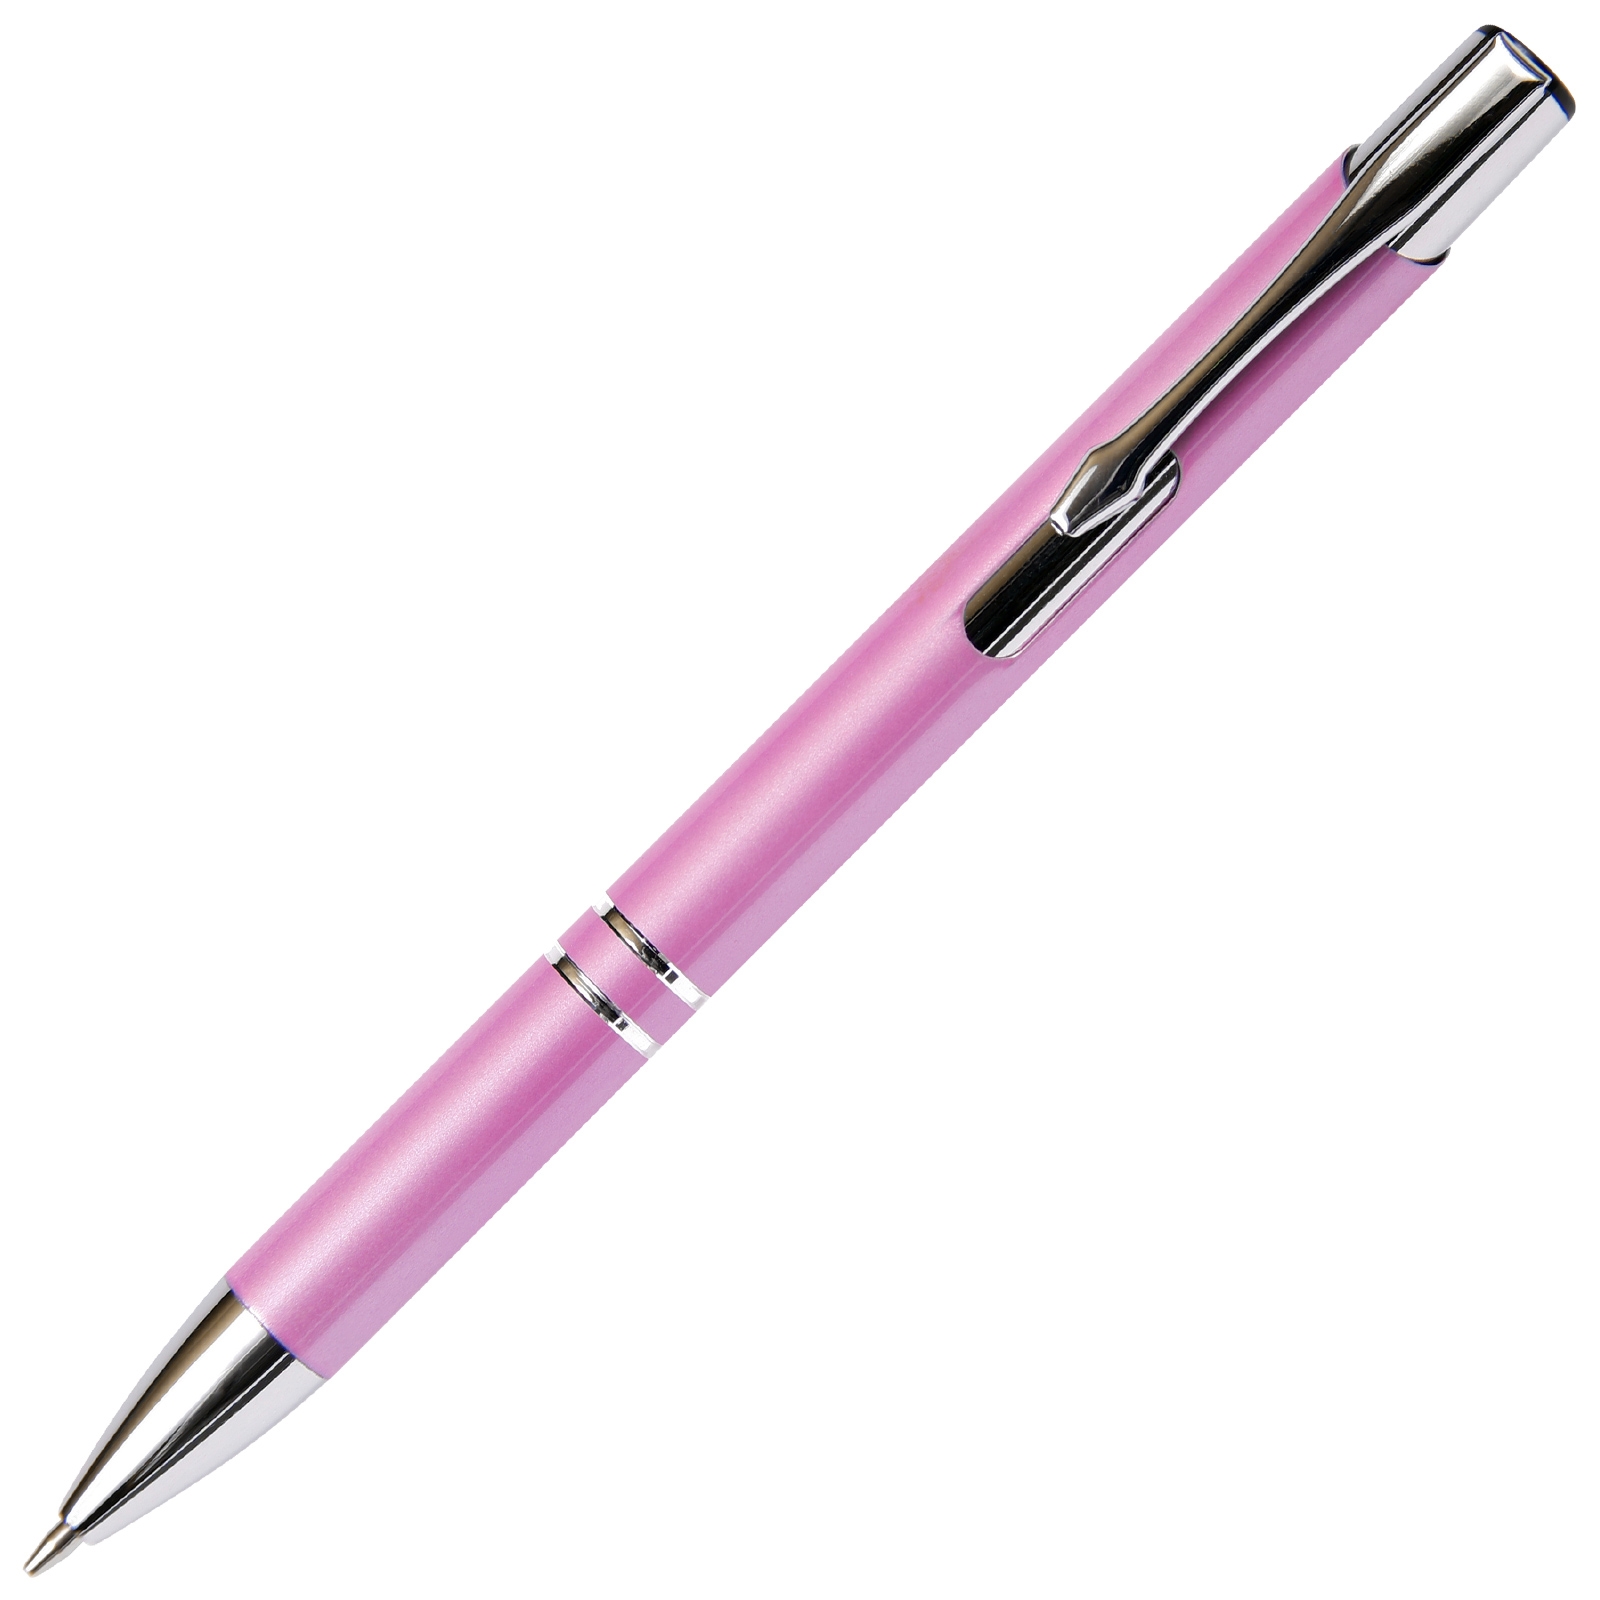 Budget Friendly JJ Mechanical Pencil - Pink with Standard 0.7mm Lead Refill By Lanier Pens